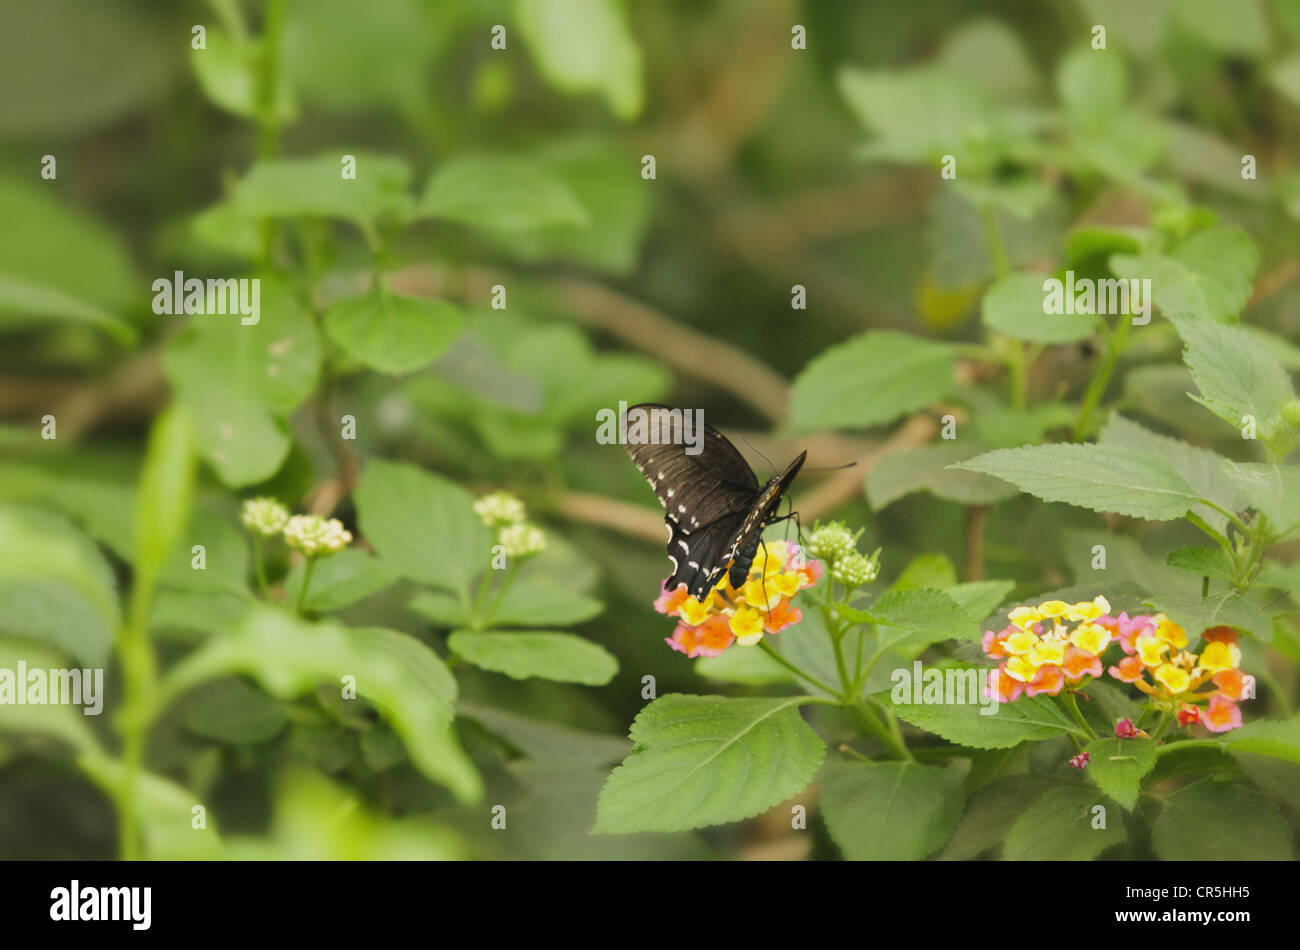 Spicebush Swallowtail butterfly Papilio troilus on shrub verbena flower plant Lantana camara with partially open wings and thorax visible in partial profile captive Stock Photo